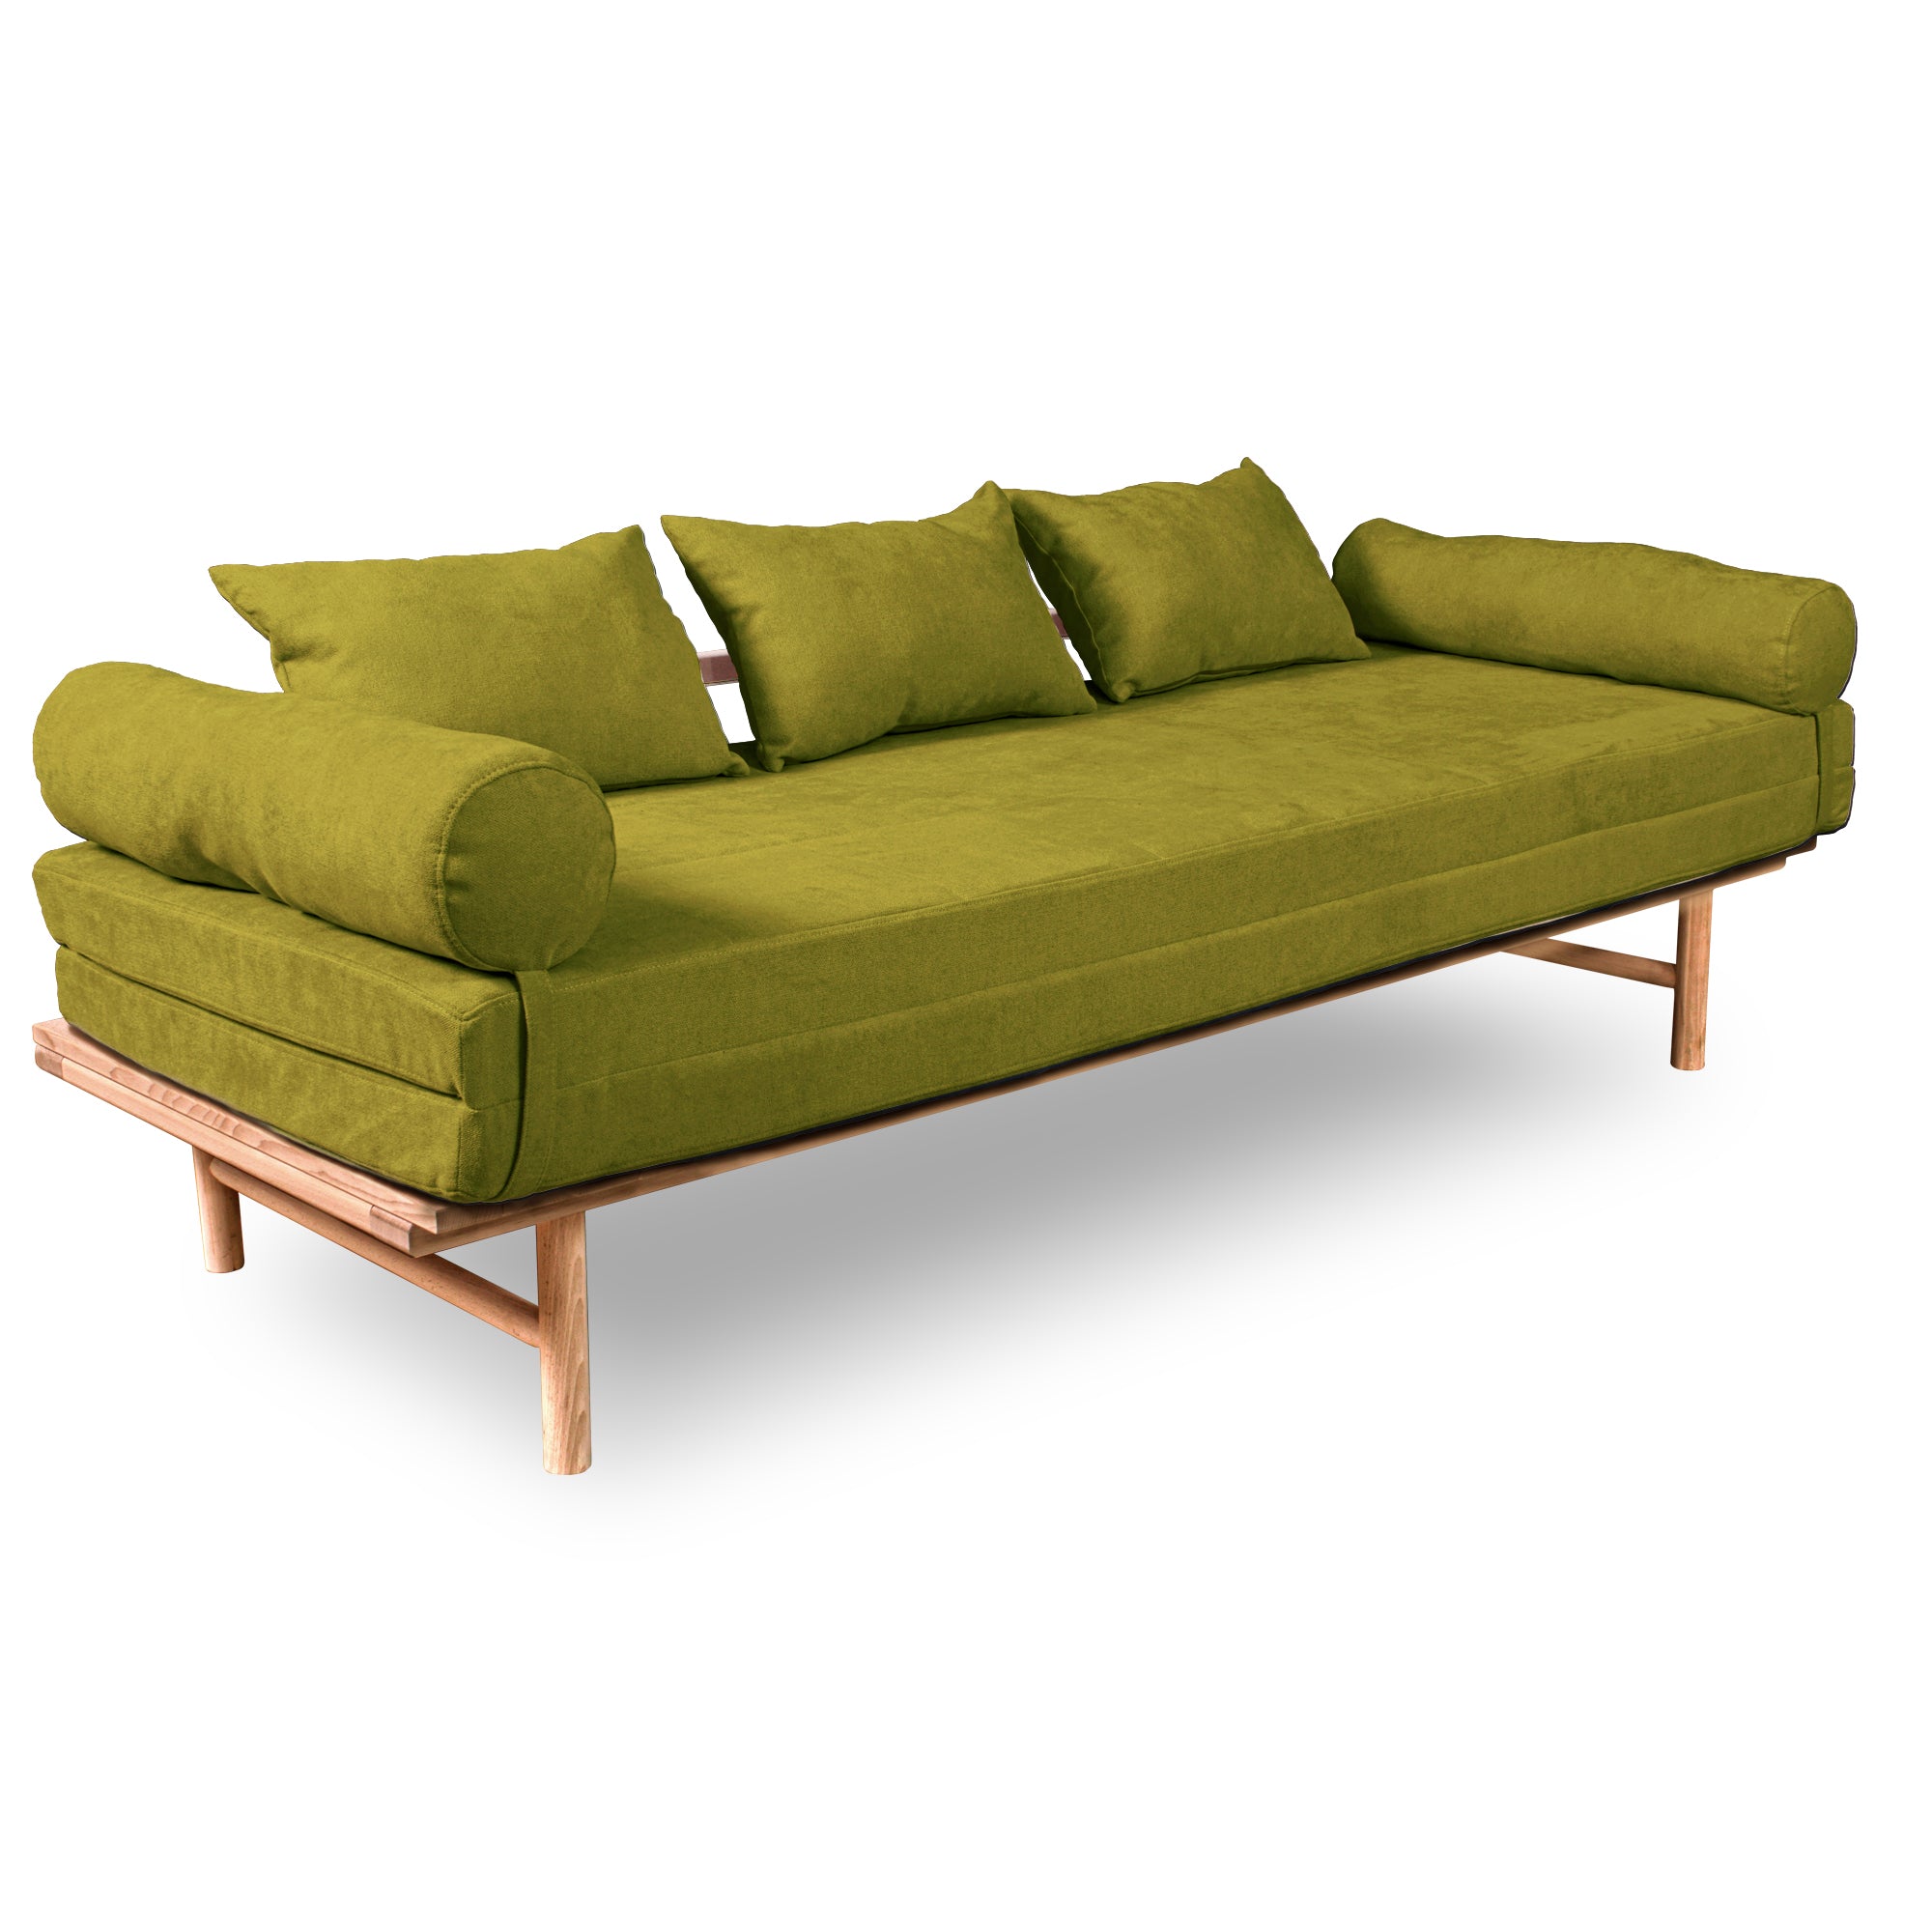 Le MAR Folding Daybed, Beech Wood Frame, Natural Colour-upholstery green